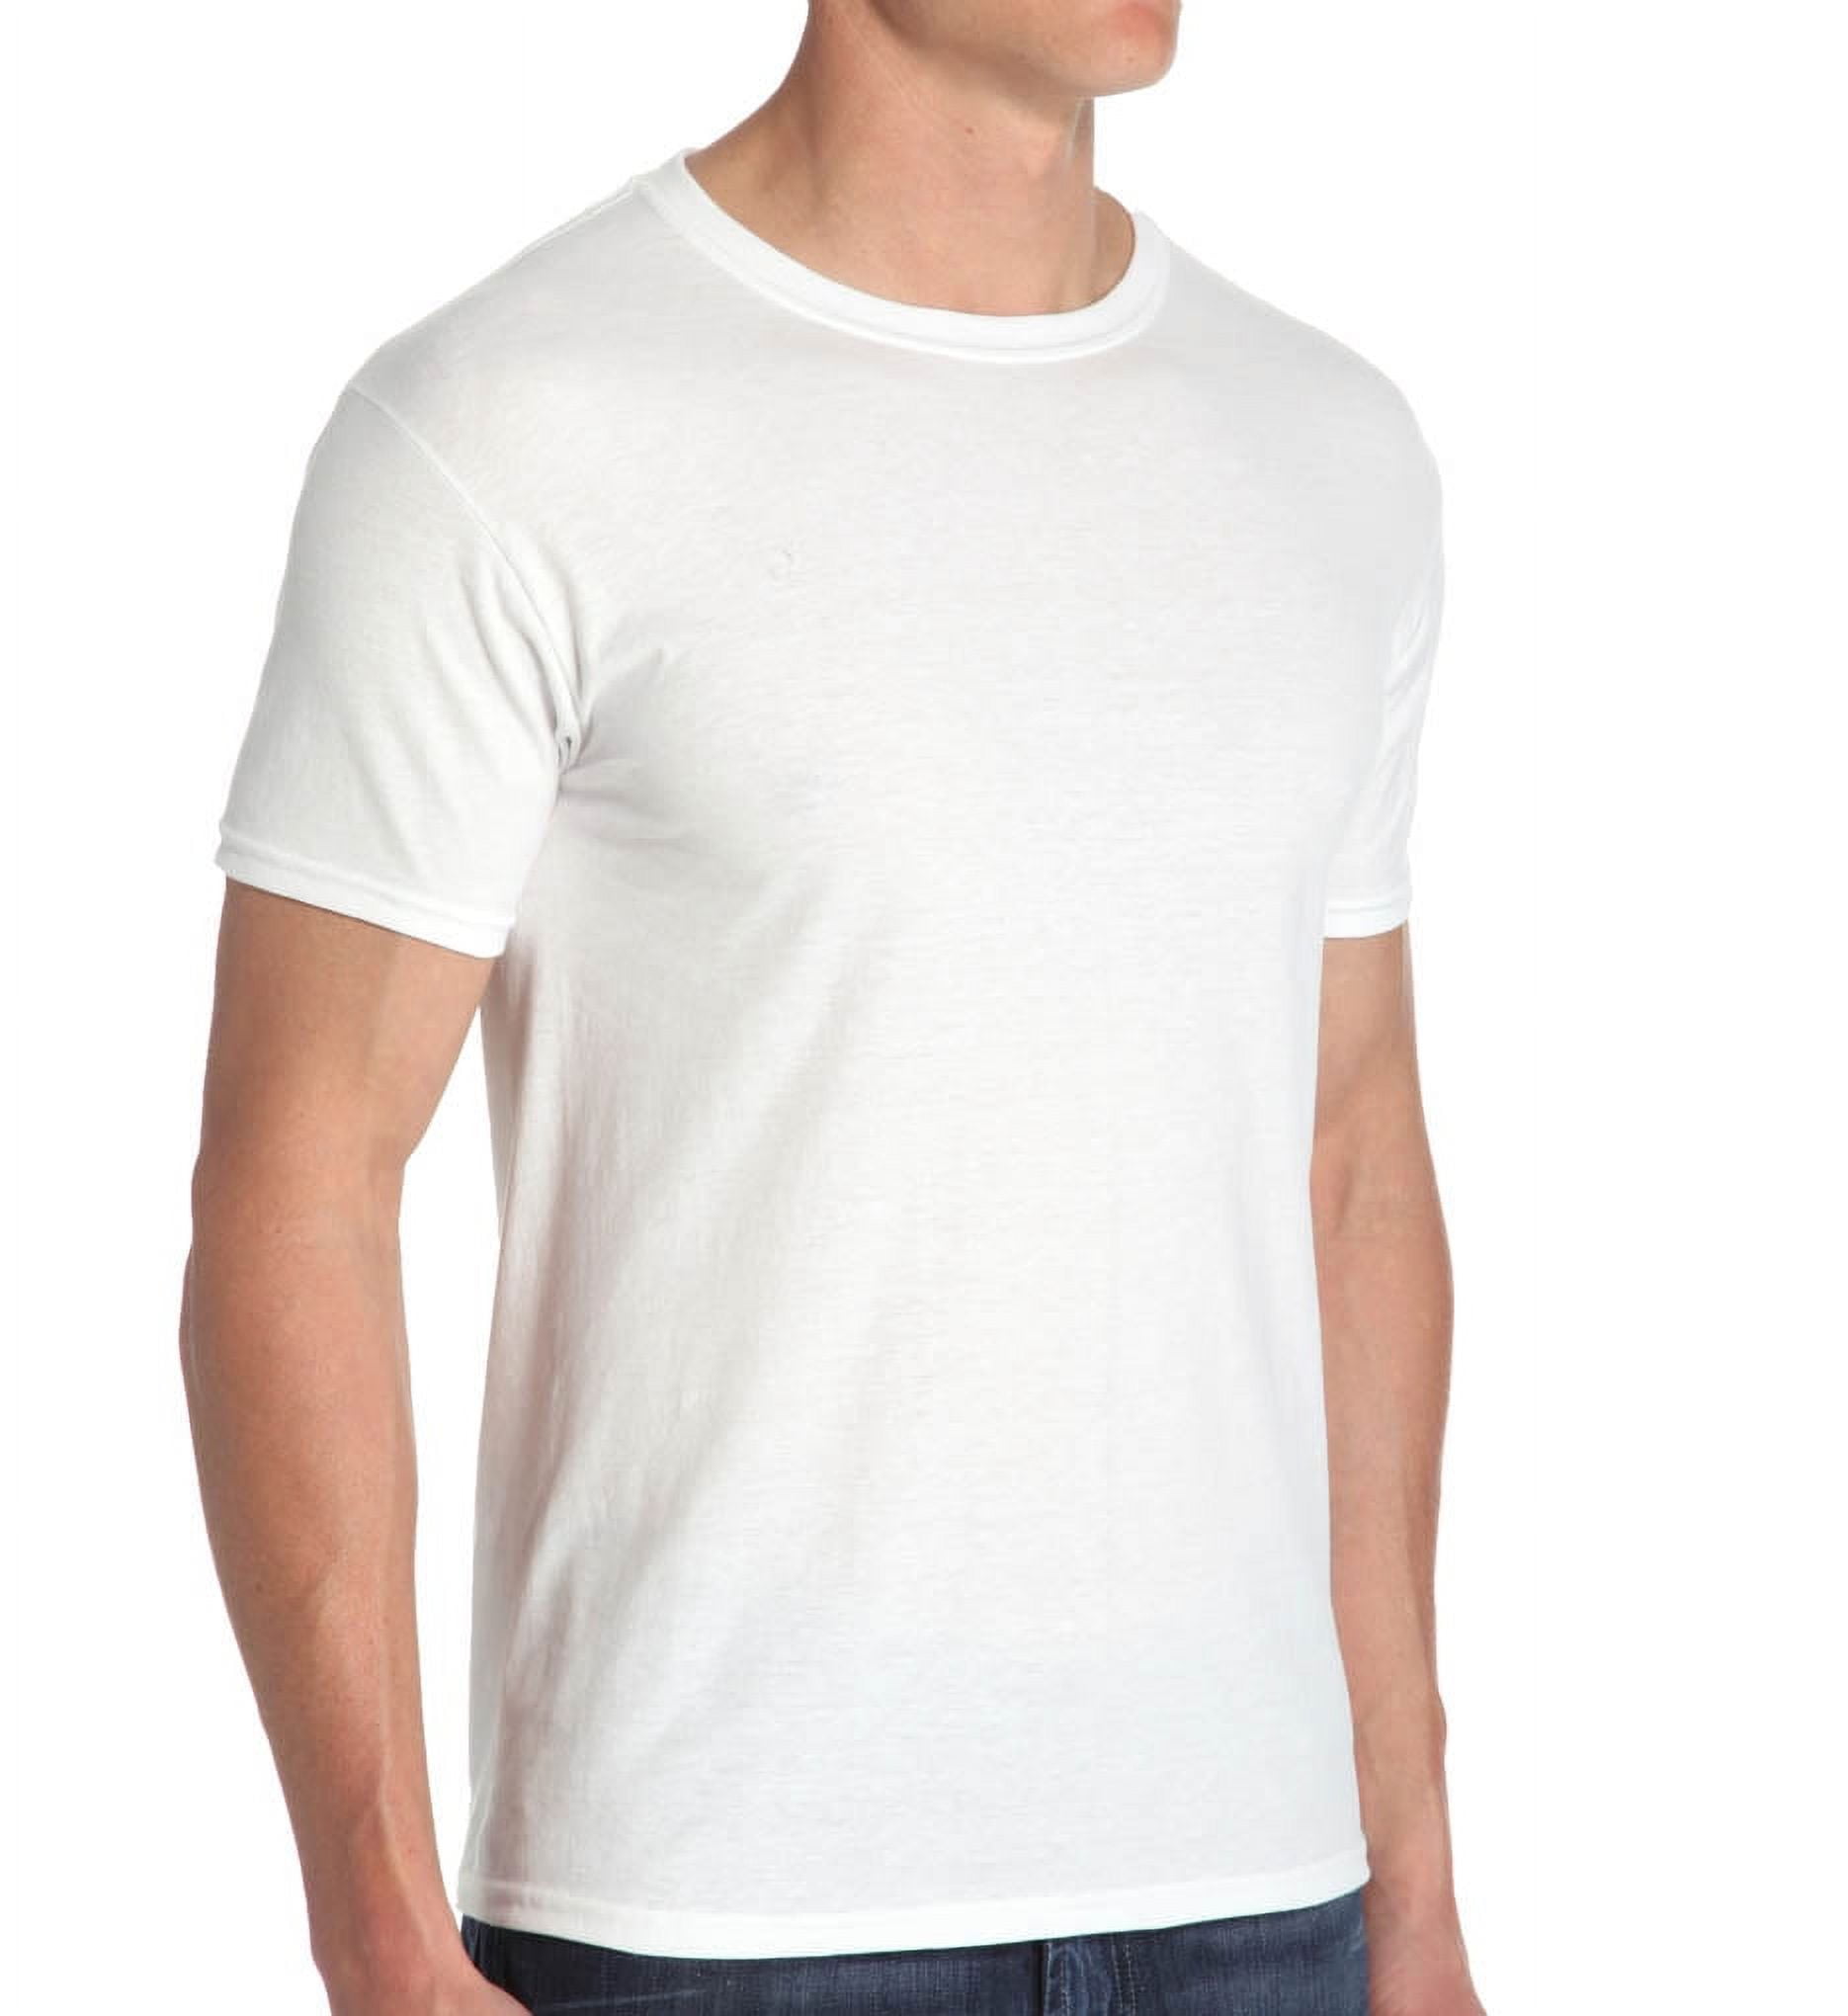 Hanes Brands 2135-XL Extra Large White Crew T-Shirt 3 Pack: Tee Shirts  (075338003627-2)